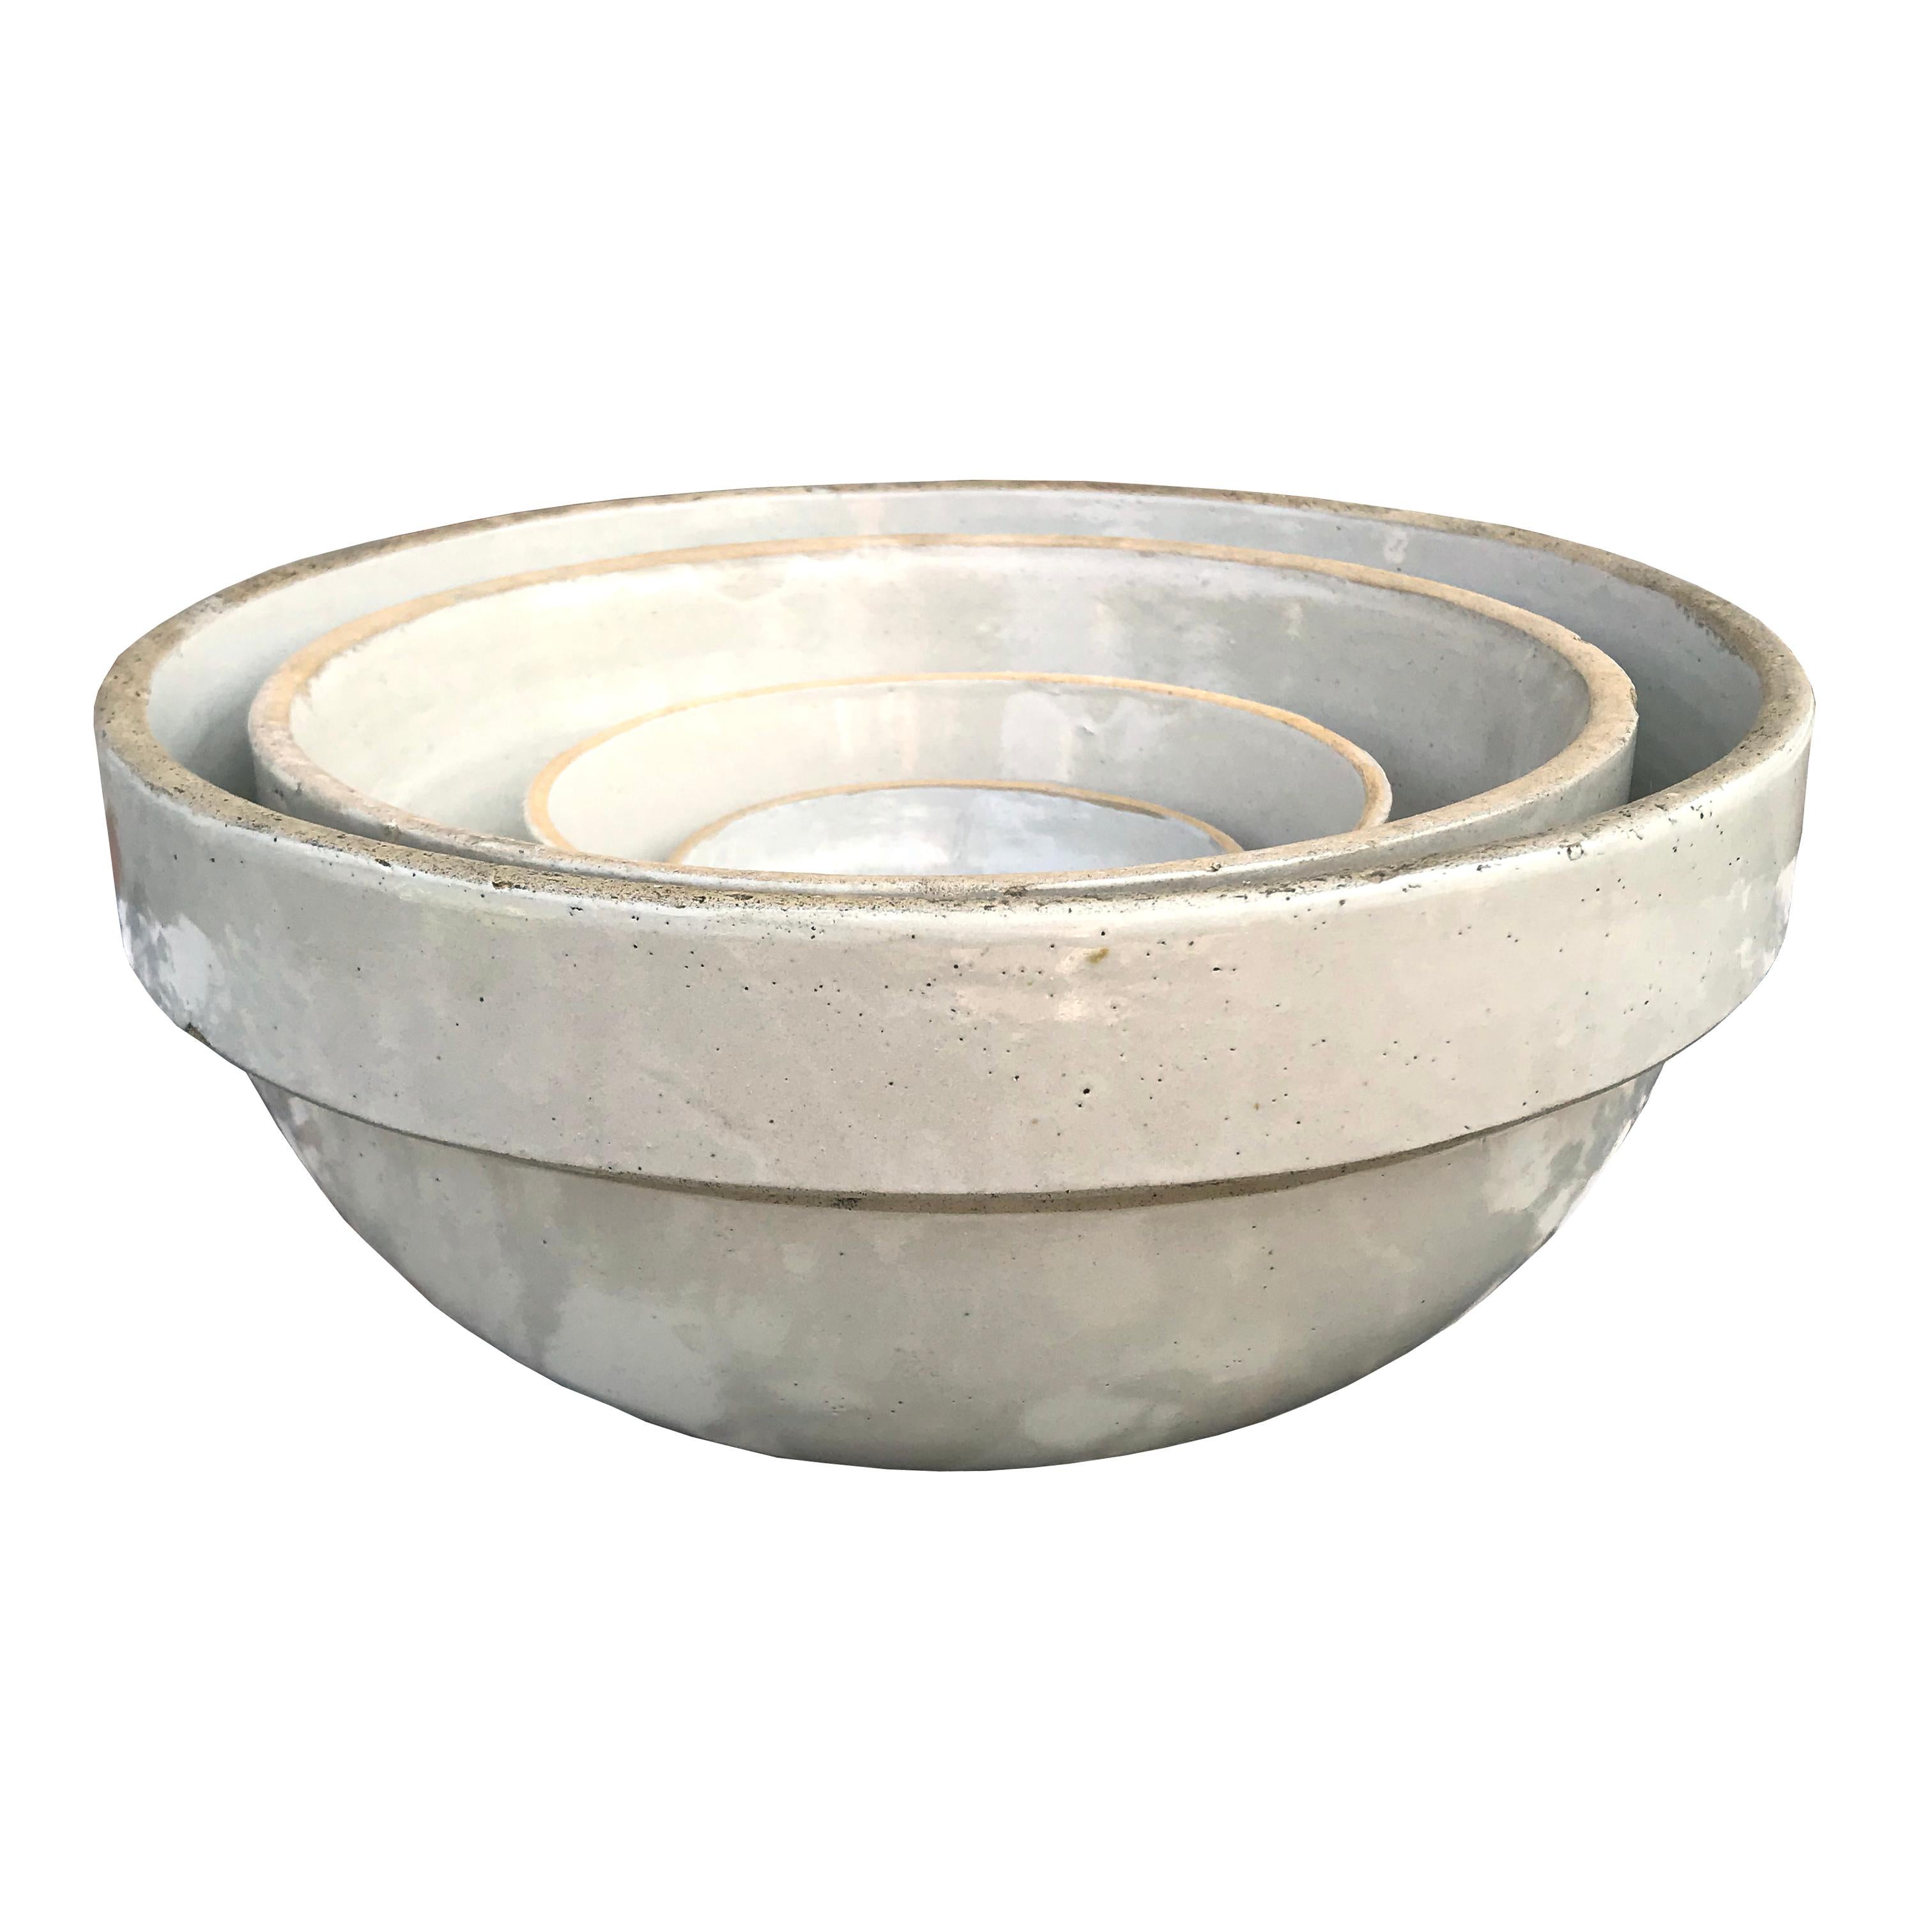 A lovely assembled set of four early 20th century American zinc-glazed stoneware mixing bowls of simple, but sophisticated, forms and similar cream colors. The extra large bowl is marked, 